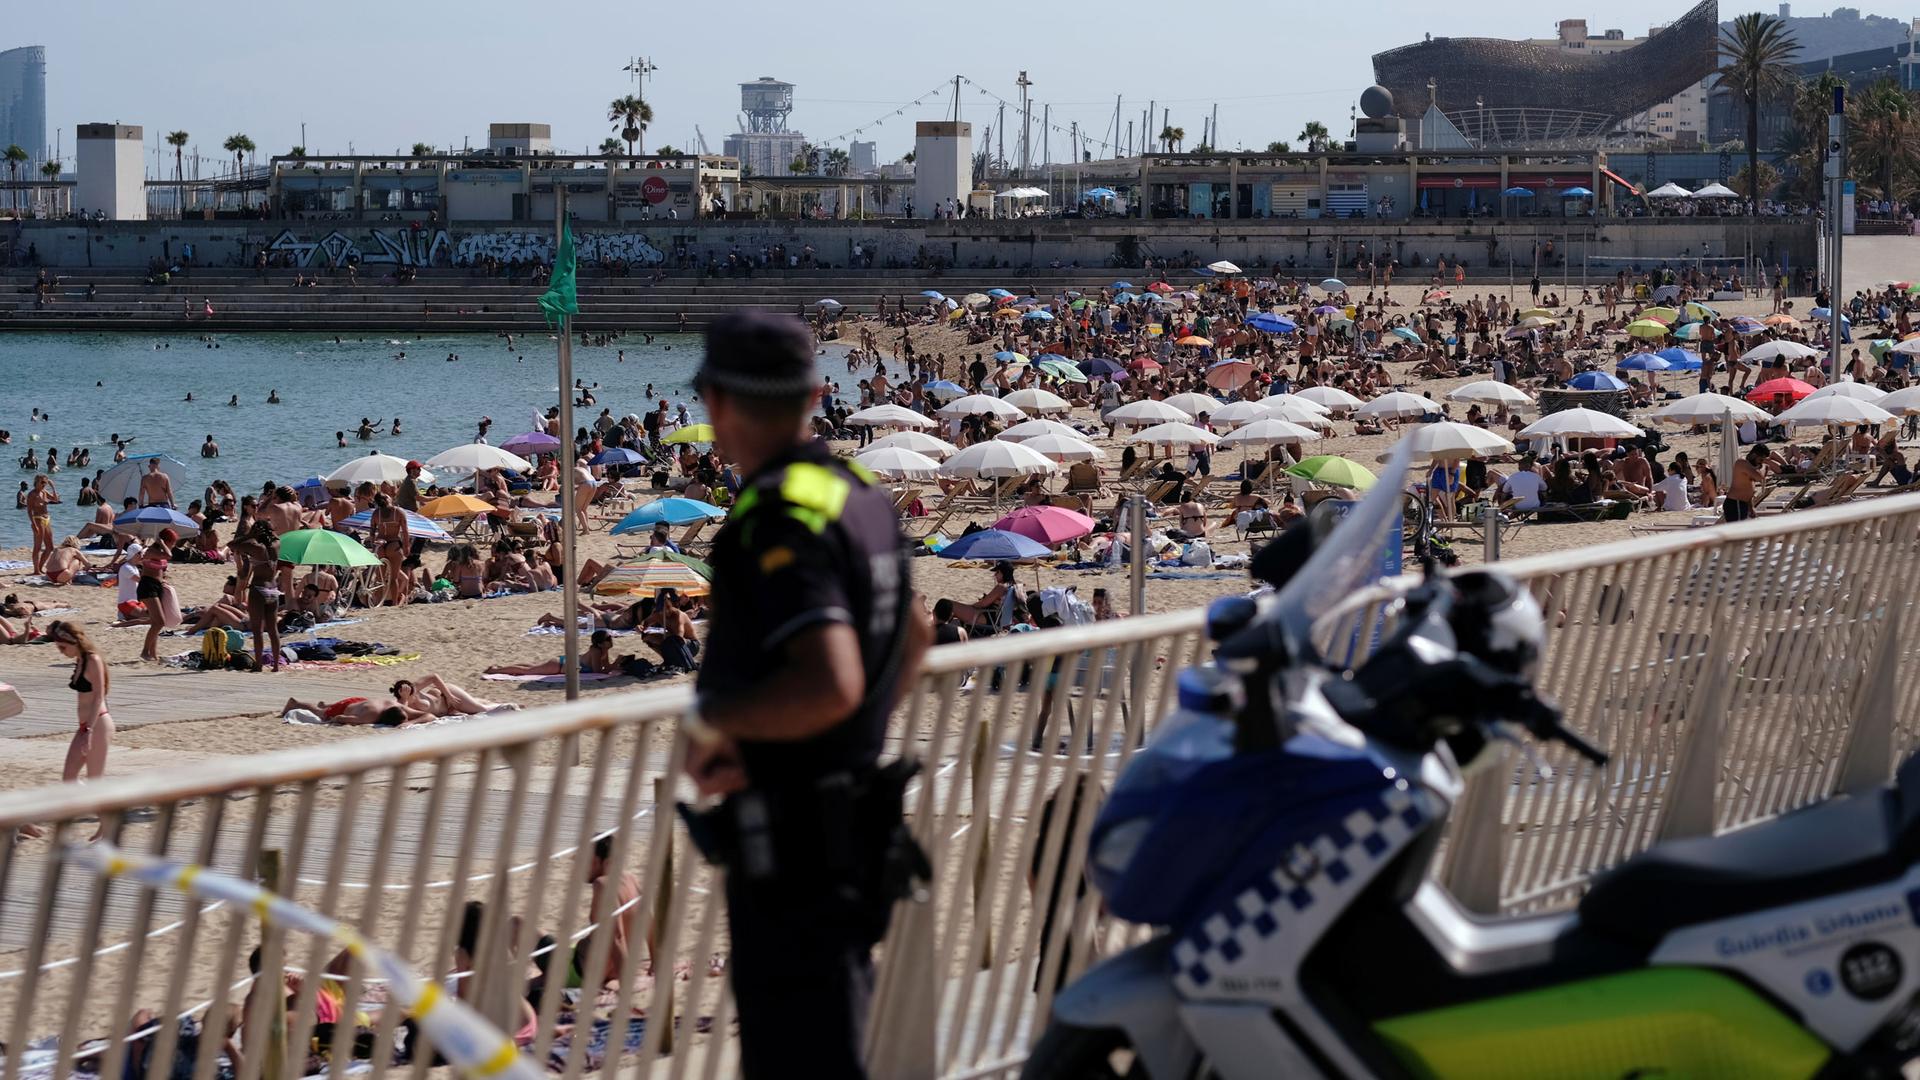 A police officer is shown in the nearground in soft focus with hundreds of beachgoers line the coast with umbrellas.